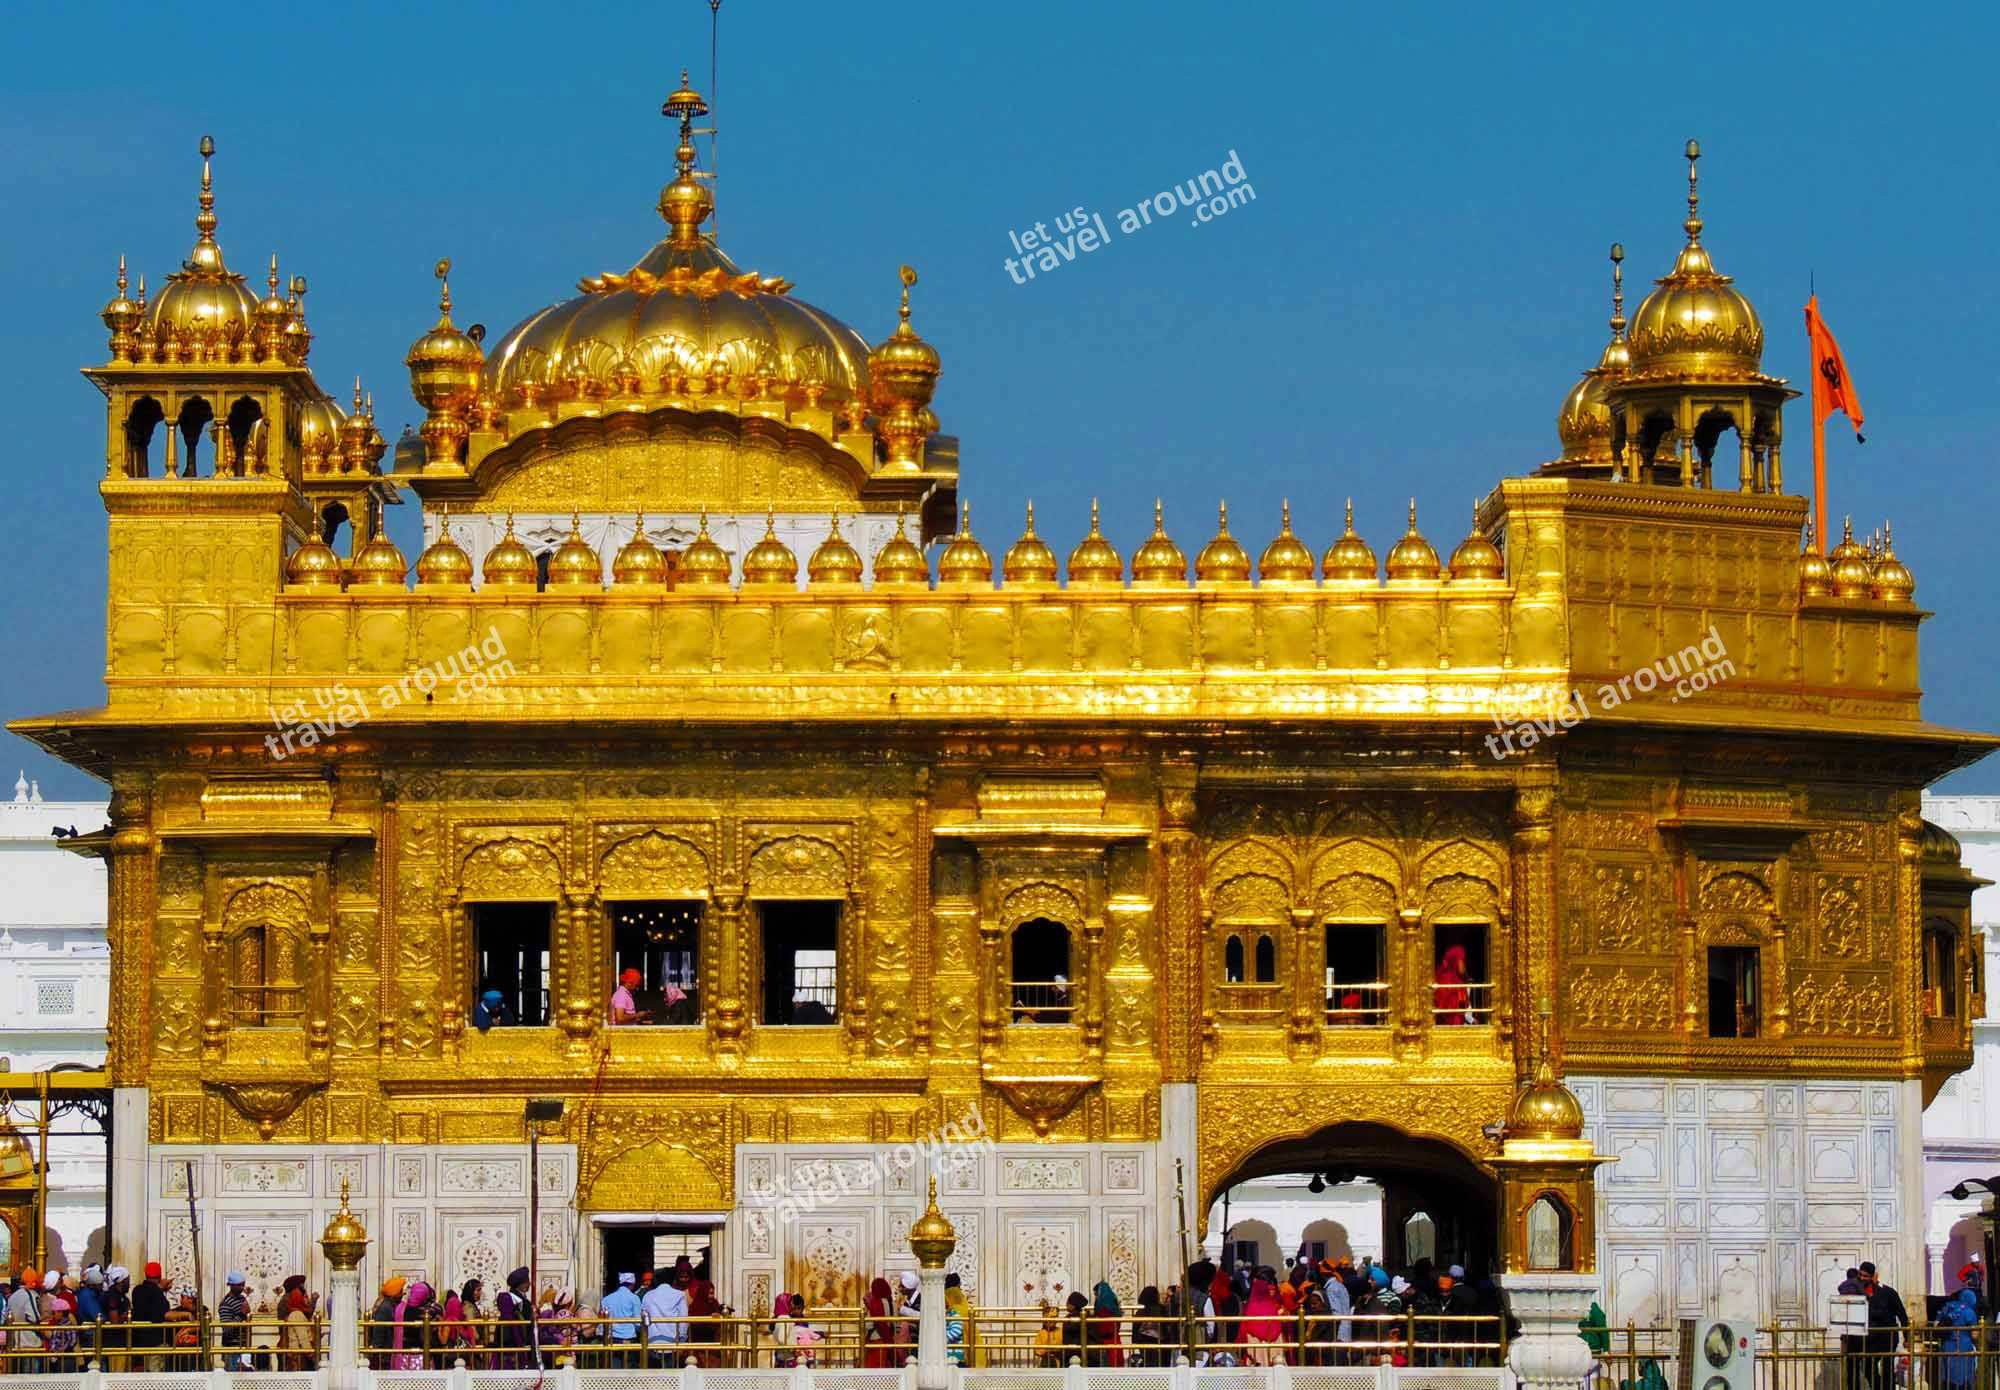 Golden Temple Amritsar Photo Tour Incredible Images | ohidul.me